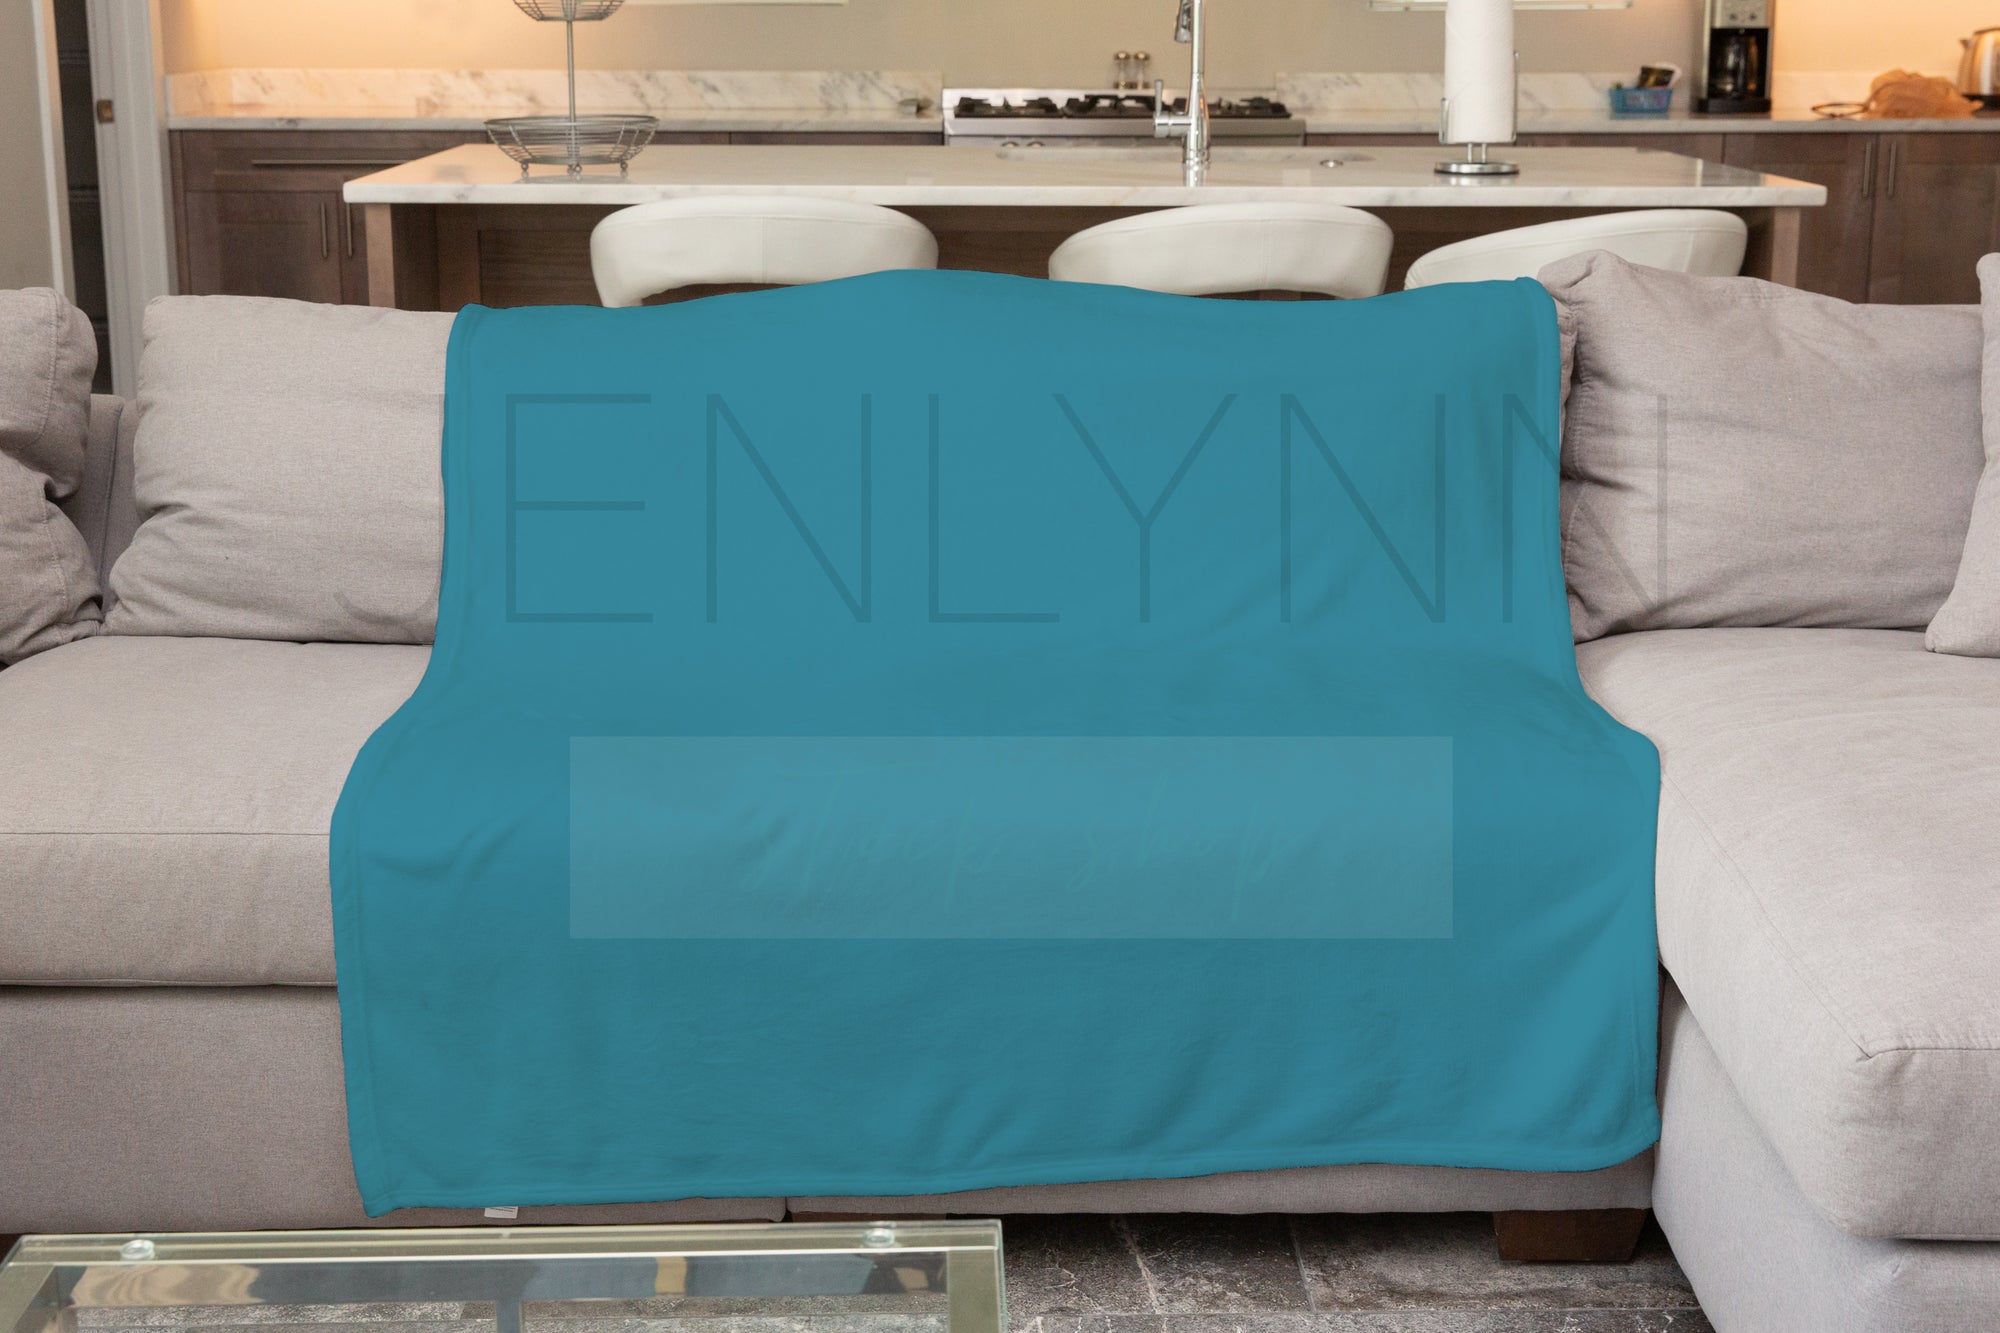 Minky Blanket on Couch Mockup #VH2